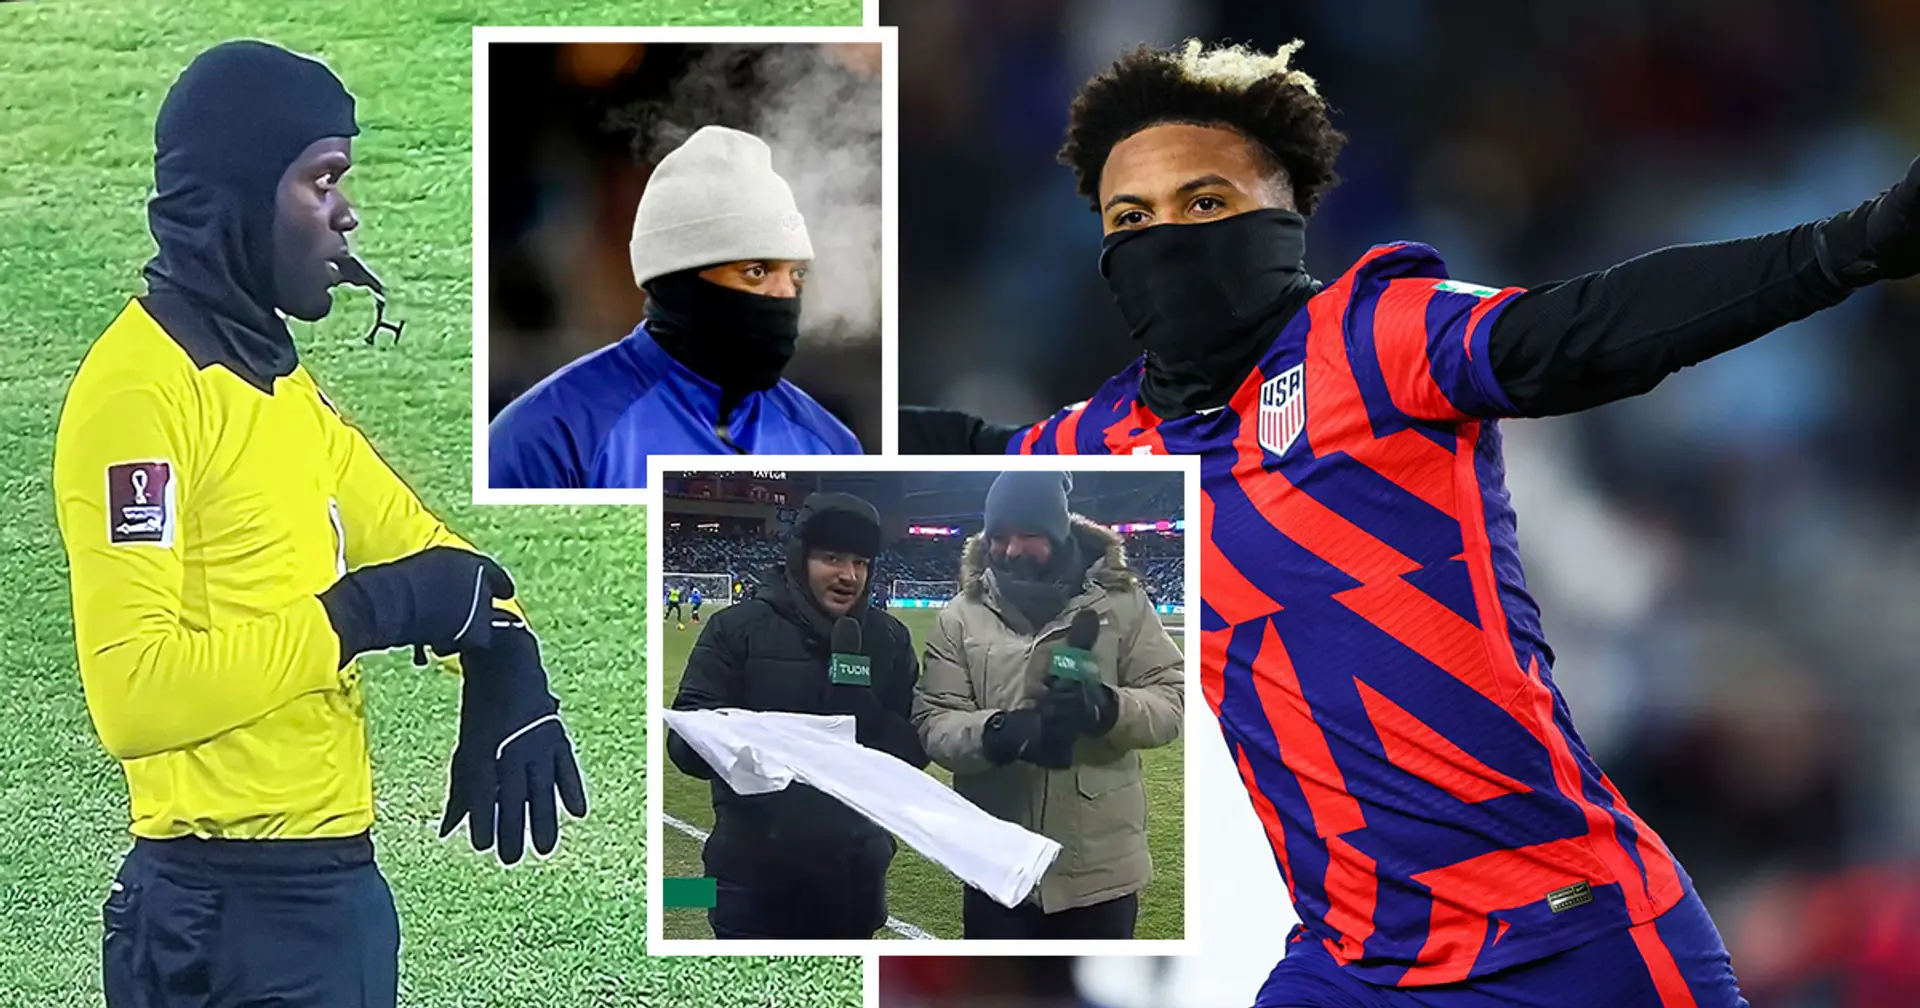 USA and Honduras played in icy temperatures of -17 degrees, 2 players forced off with hypothermia